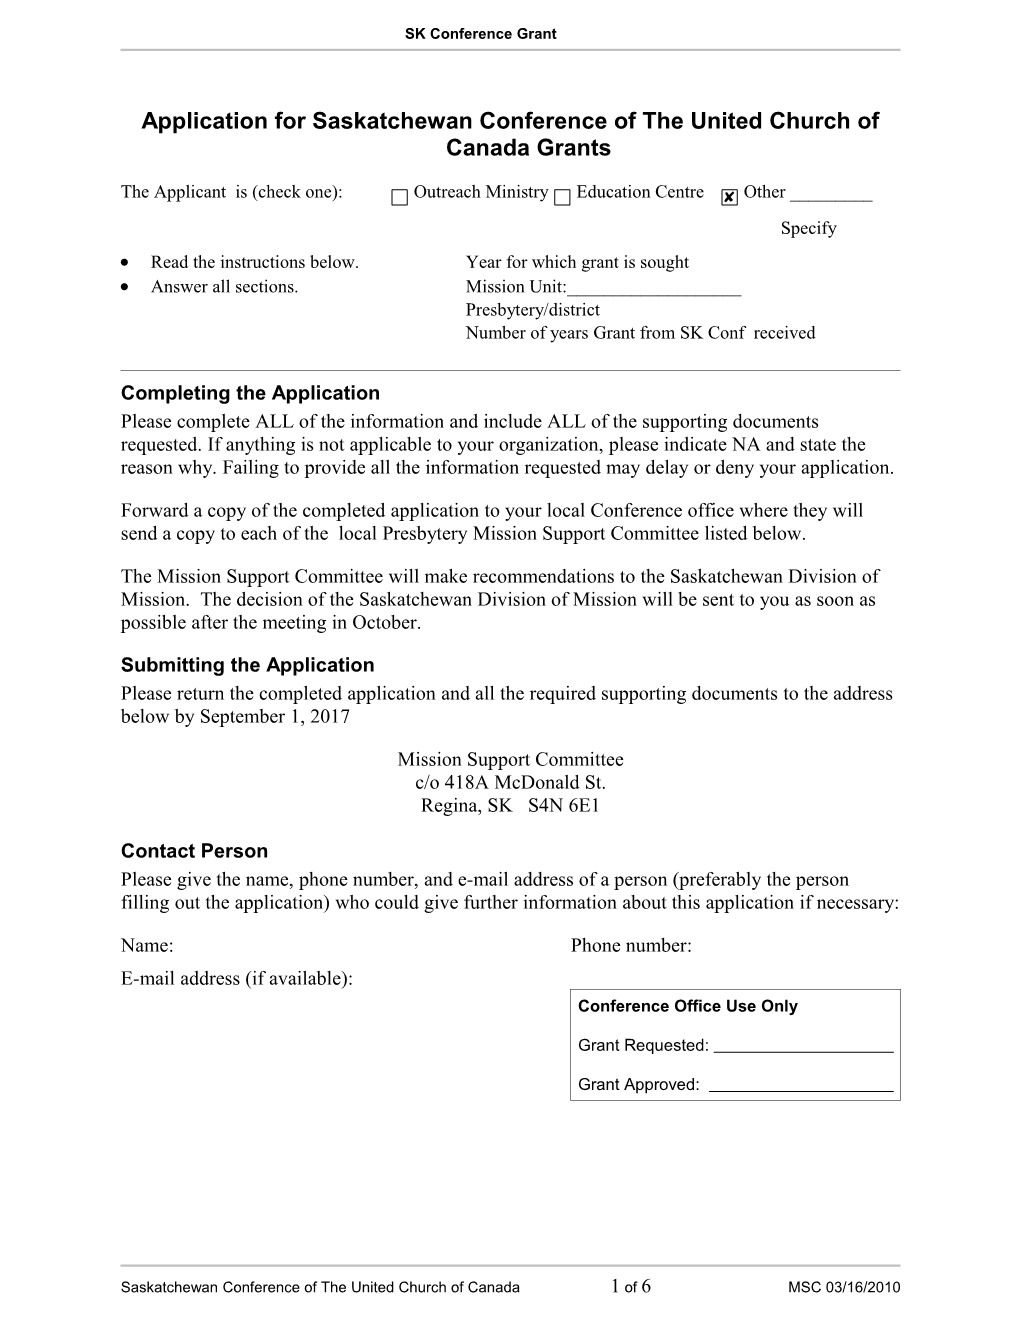 MSG 7: Application for United Church Mission Outreach Ministry and Social Issues Projects